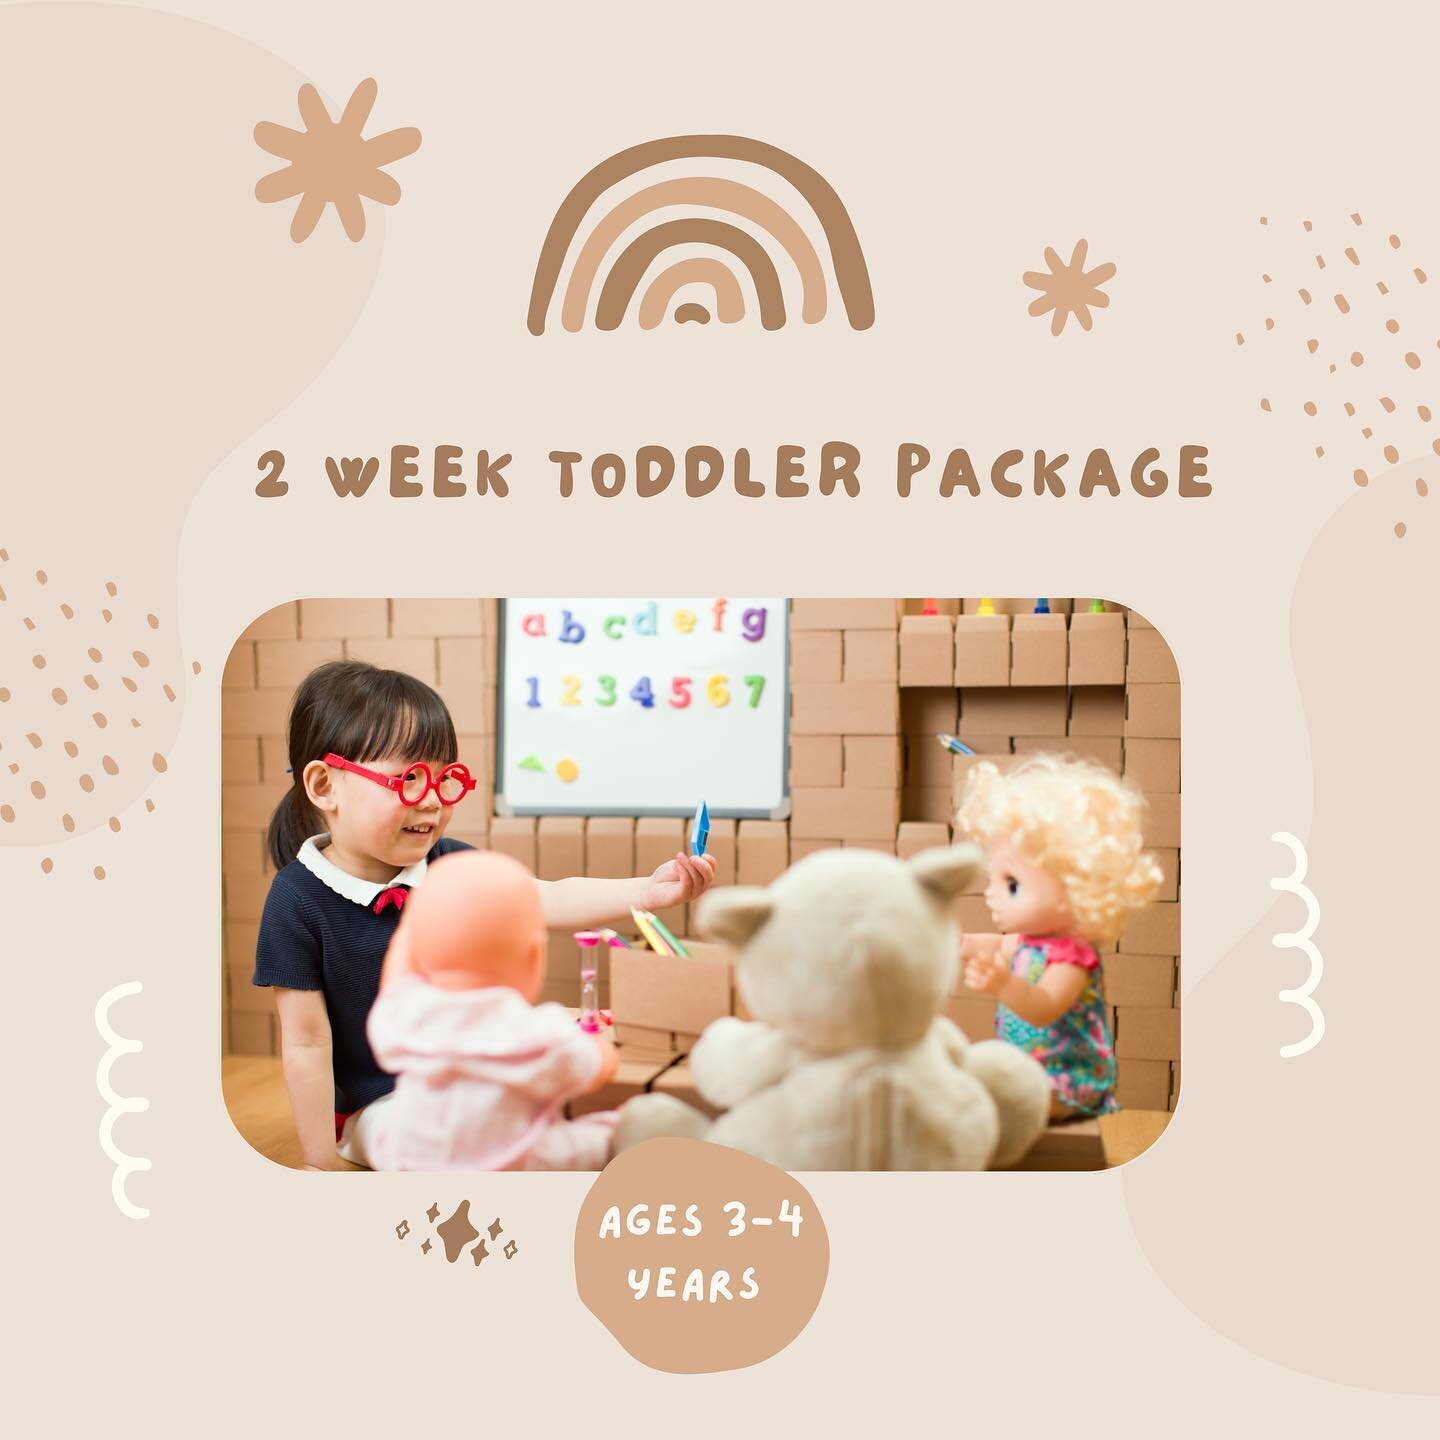 I often get asked if I work with toddlers. The answer - YES, ABSOLUTELY! ☺️⠀
⠀
Swipe to see what&rsquo;s included in the 2 week all inclusive sleep package for toddlers ages 3-4 years old. ⠀
⠀
If you are interested in this service, or would like more